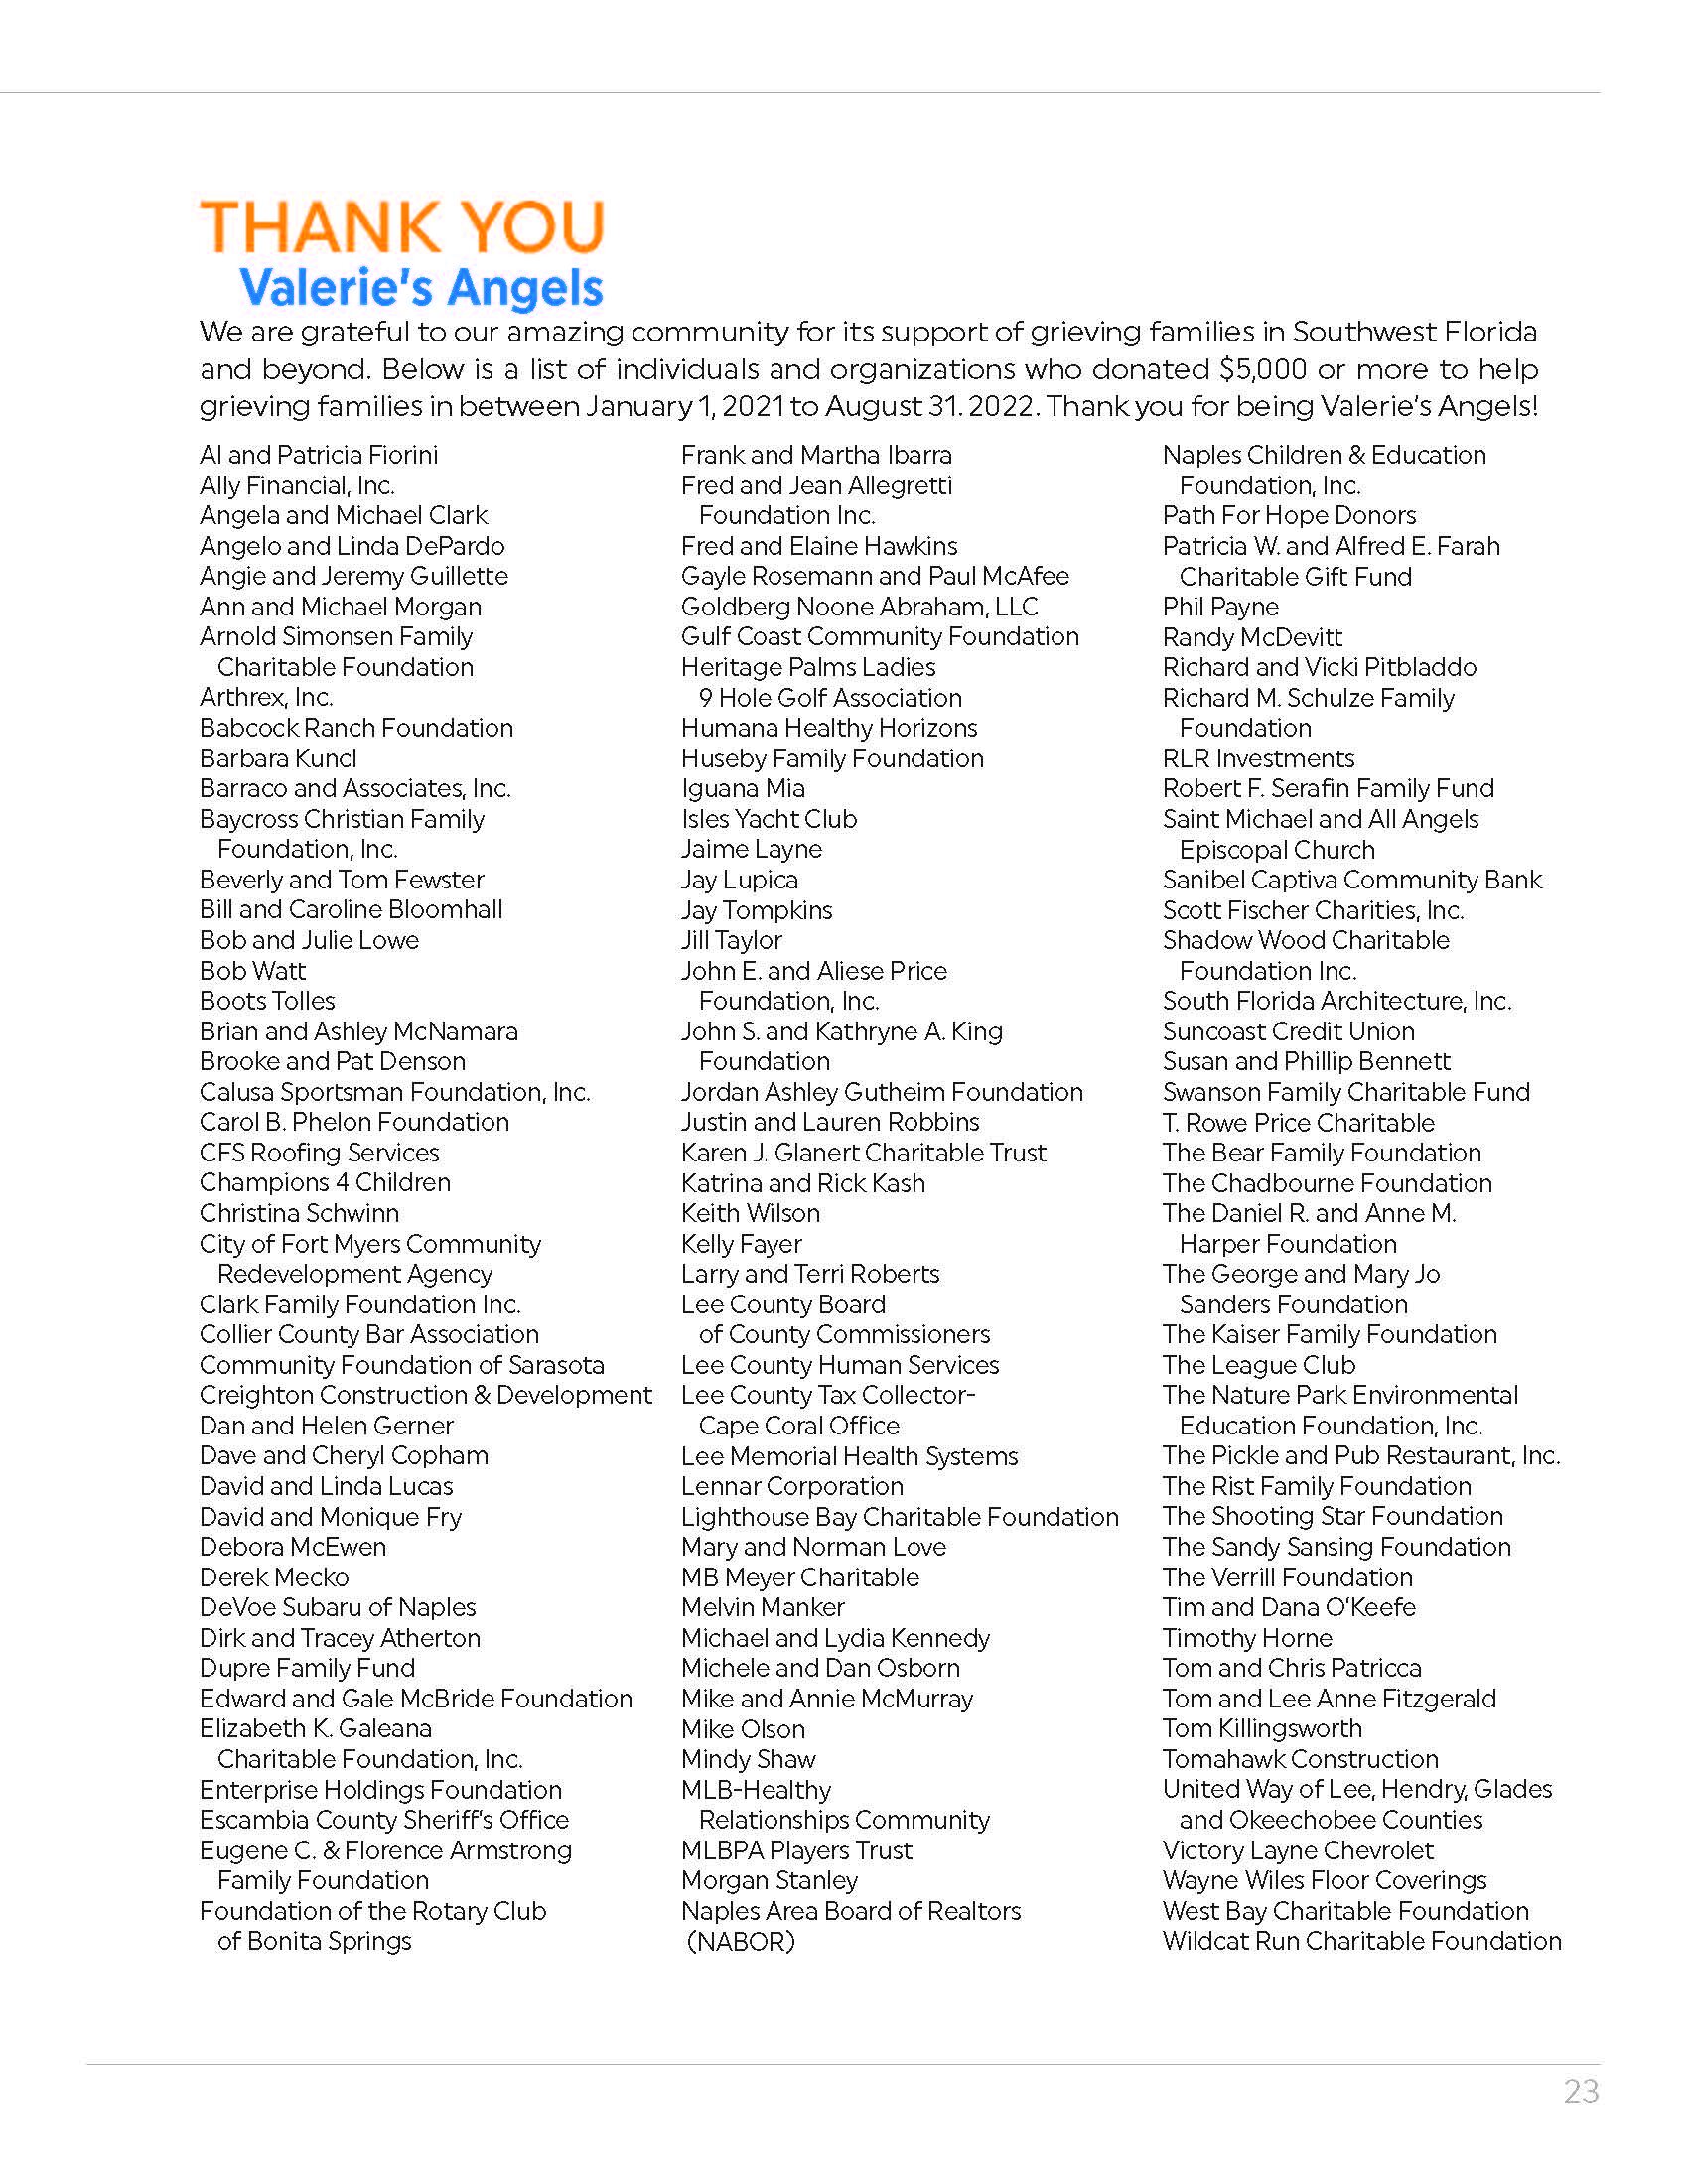 08-2022-VH-AnnualReport-Pages-LR_Page_23.jpg